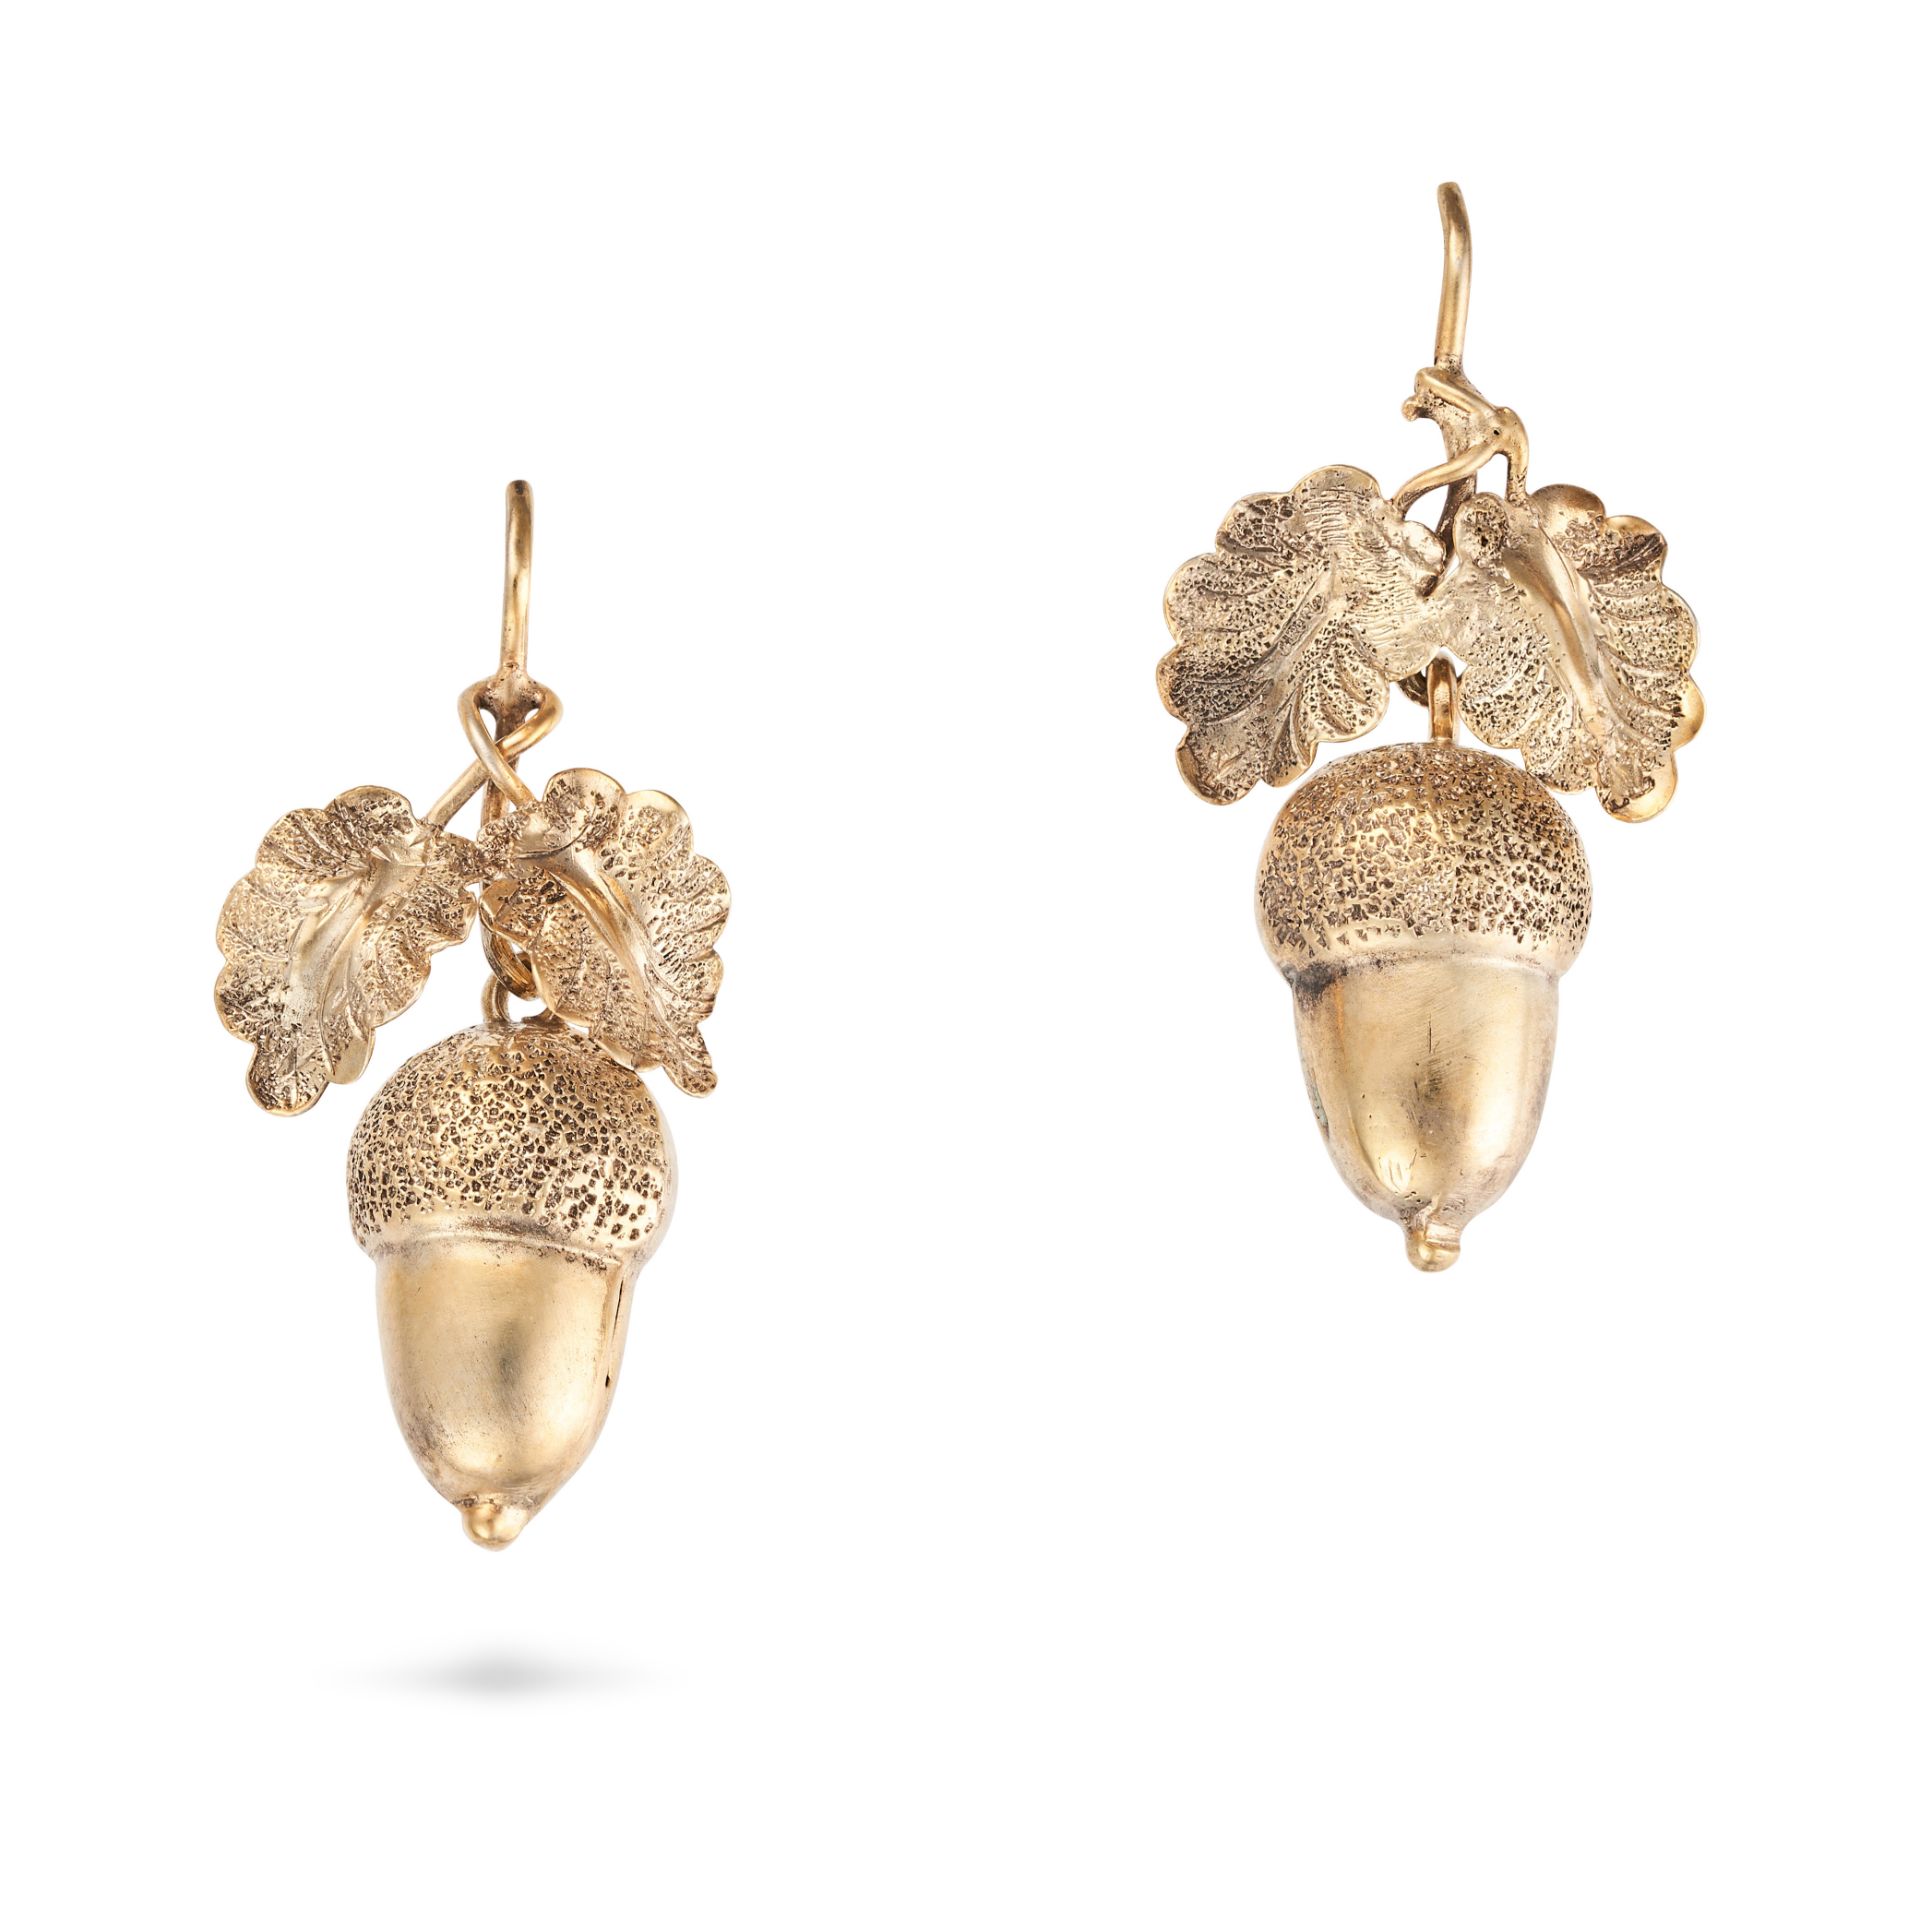 A PAIR OF ANTIQUE ACORN DROP EARRINGS in yellow gold, each designed as oak leaves suspending an a...